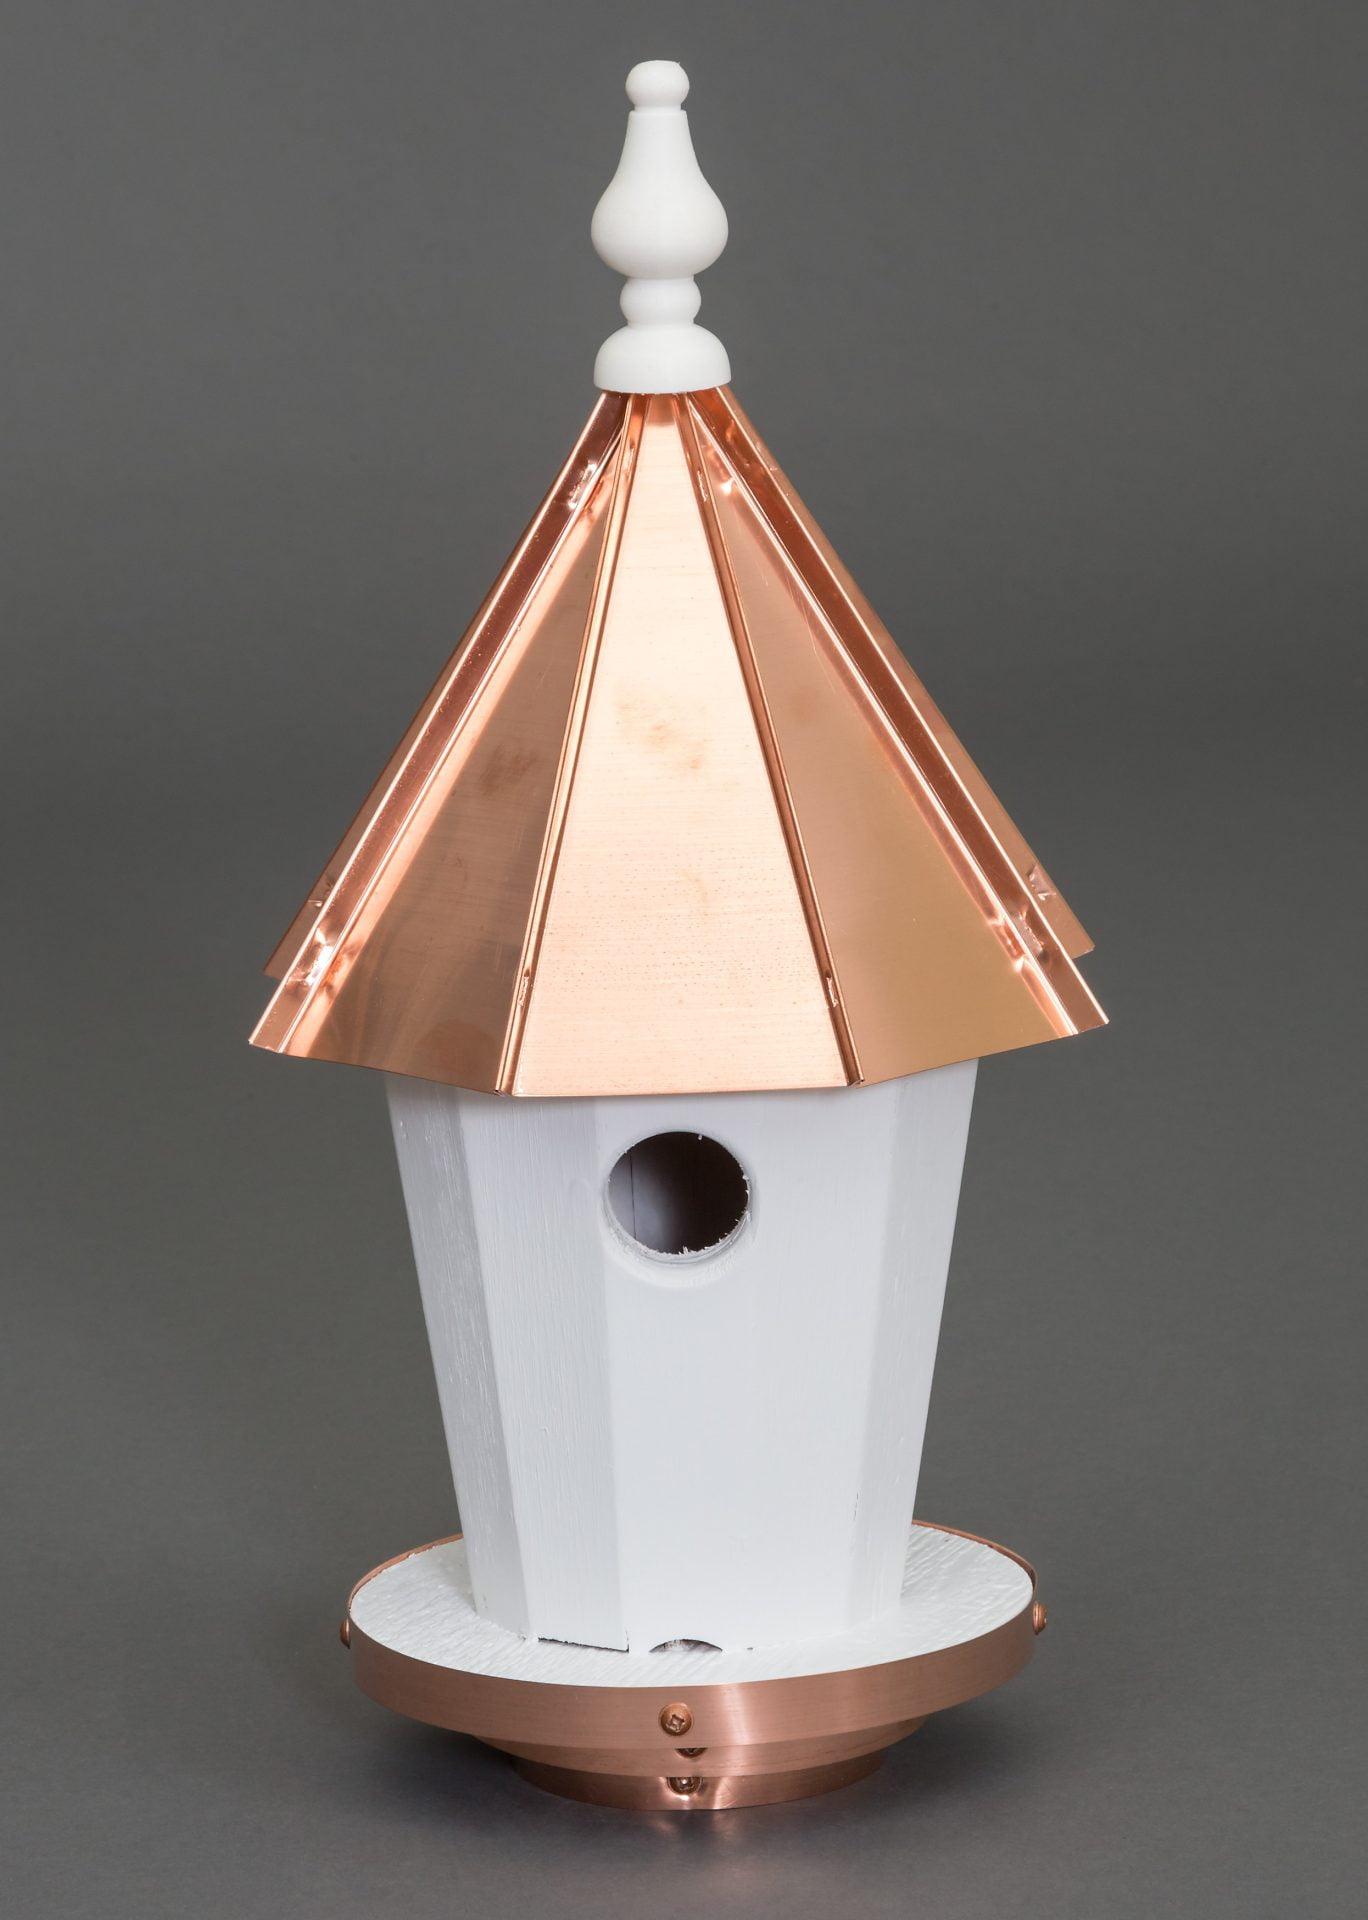 Round Blue Bird House with Copper Roof